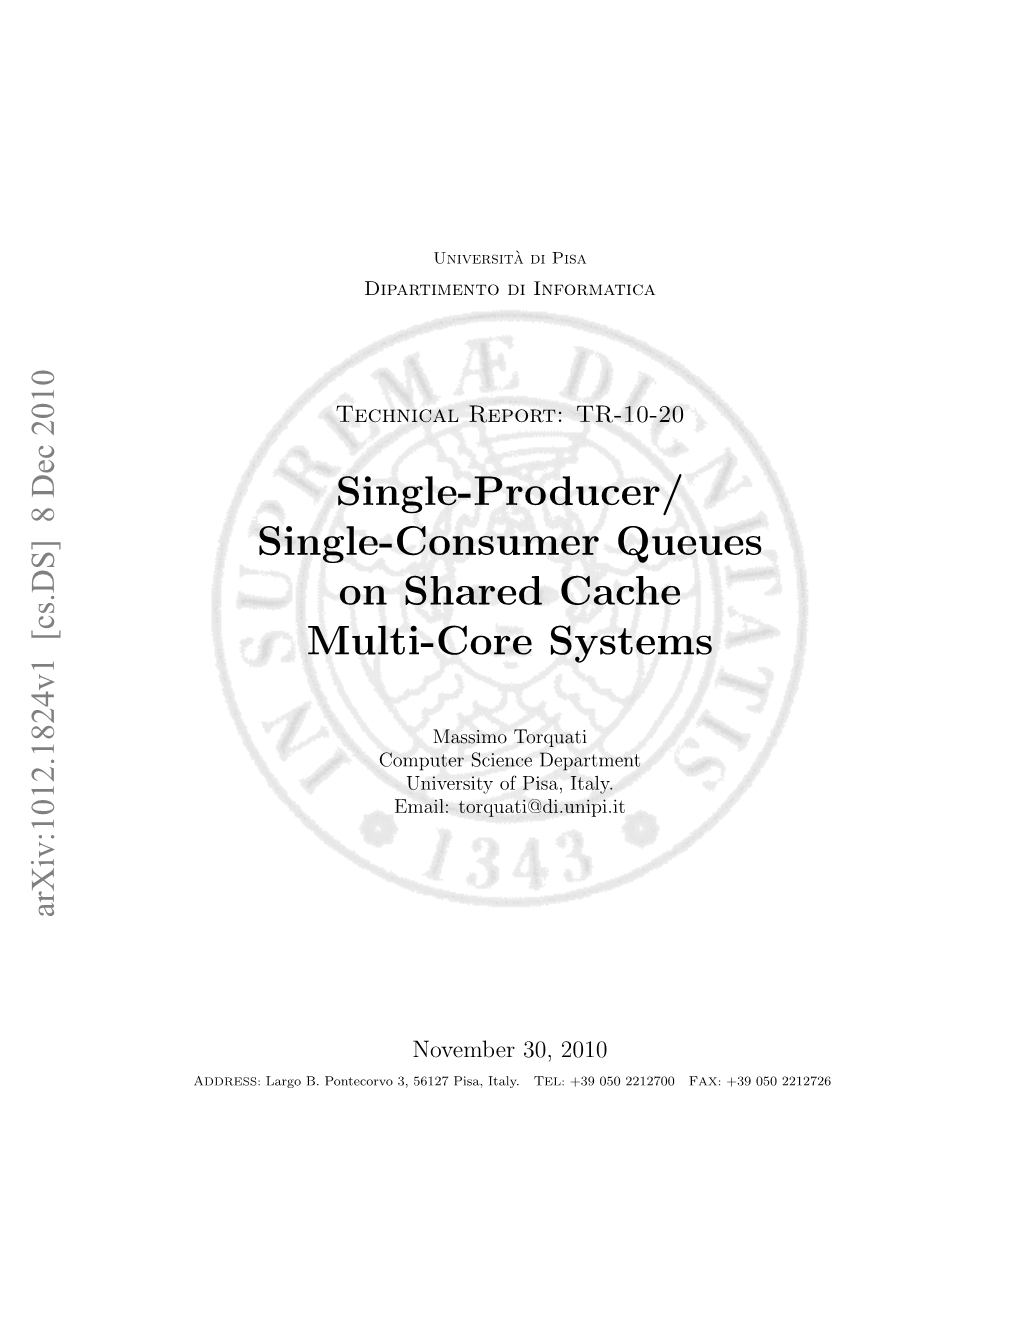 Single-Producer/ Single-Consumer Queues on Shared Cache Multi-Core Systems